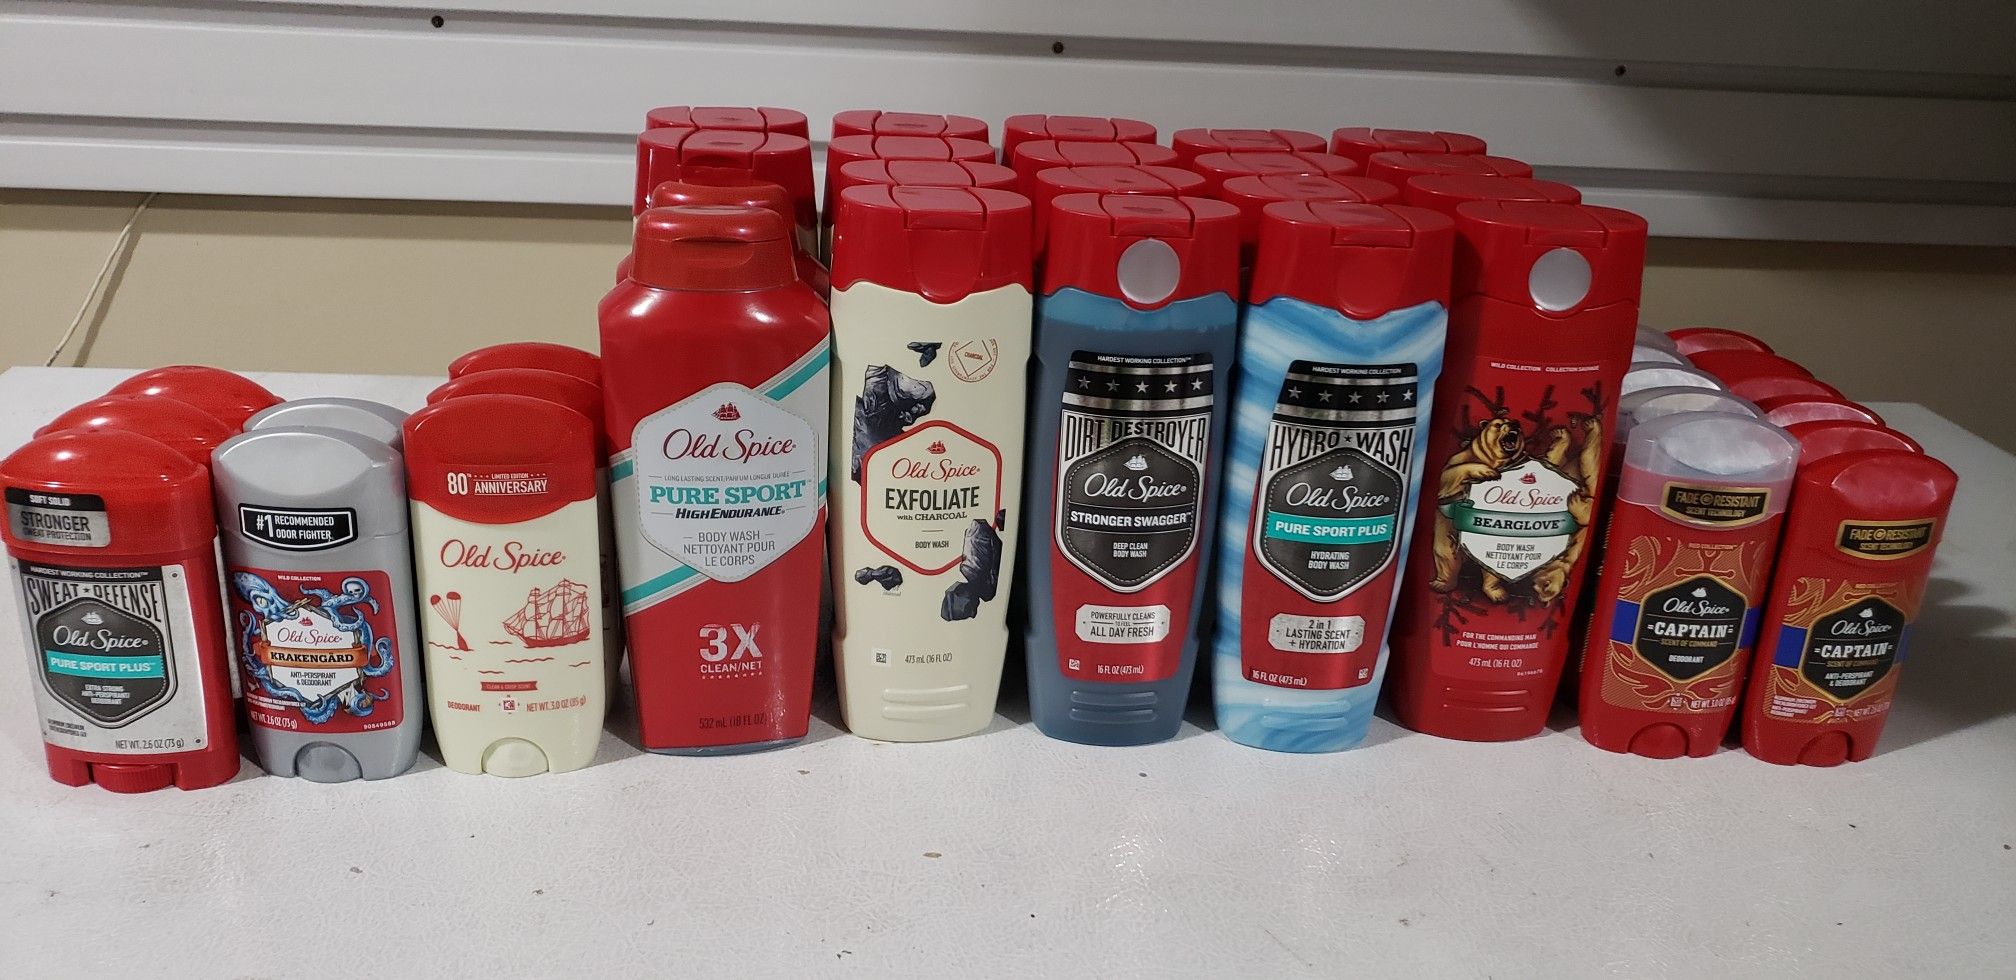 Old spice body wash sale